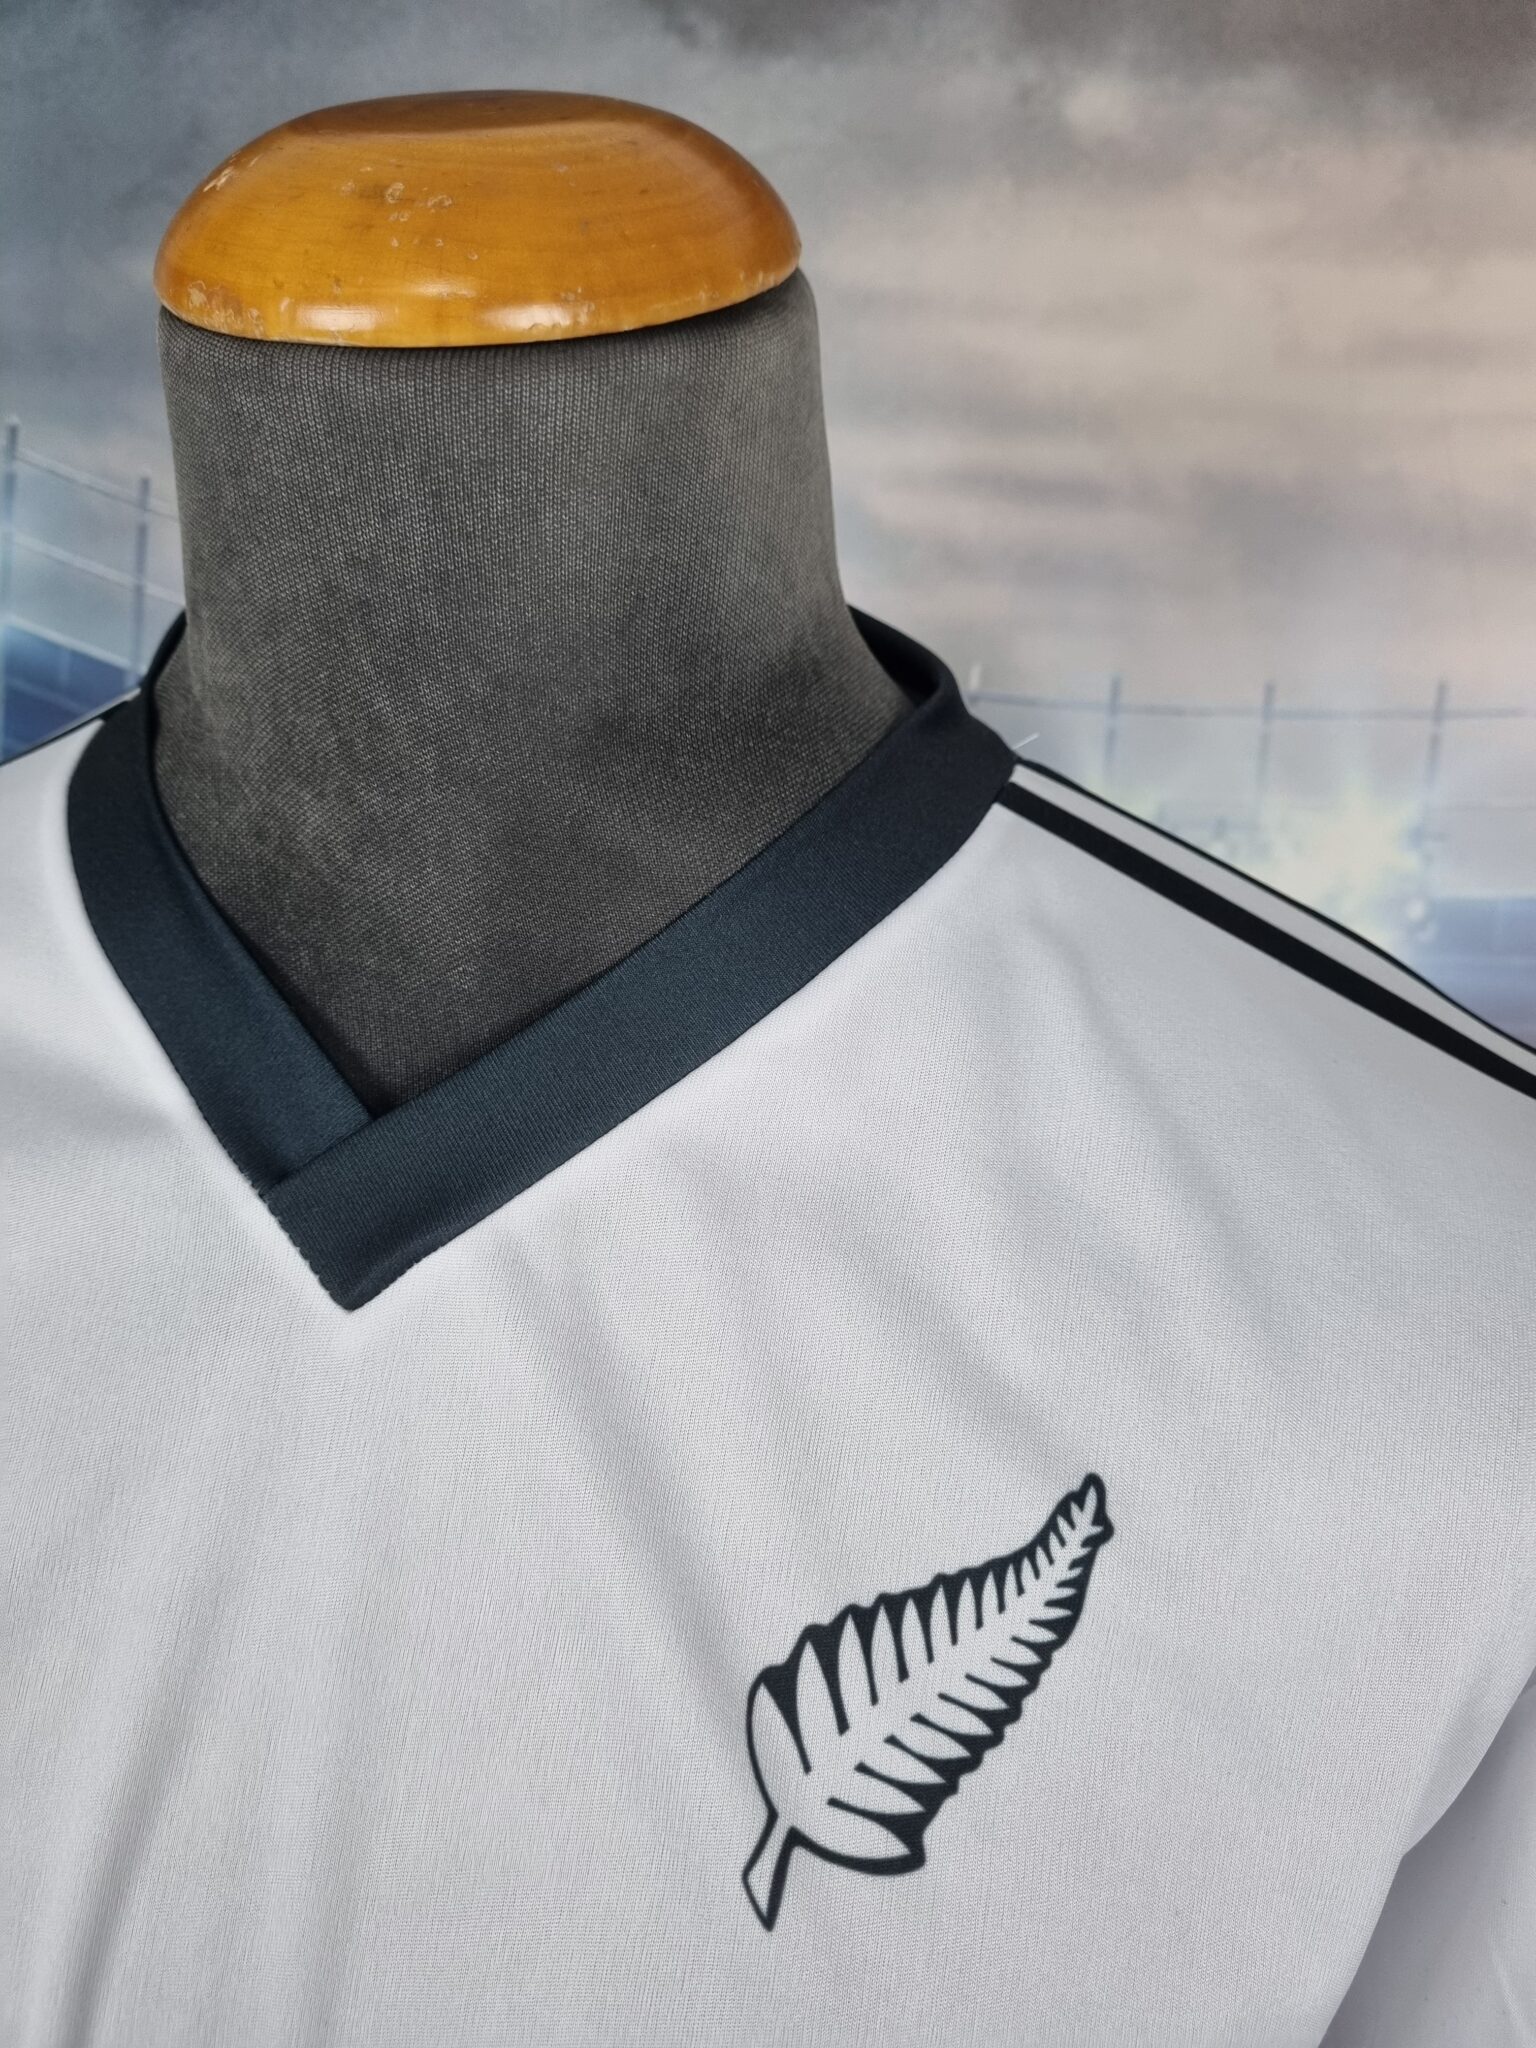 New Zealand National Team Jersey 1982 : the All Whites - Sport Club Memories